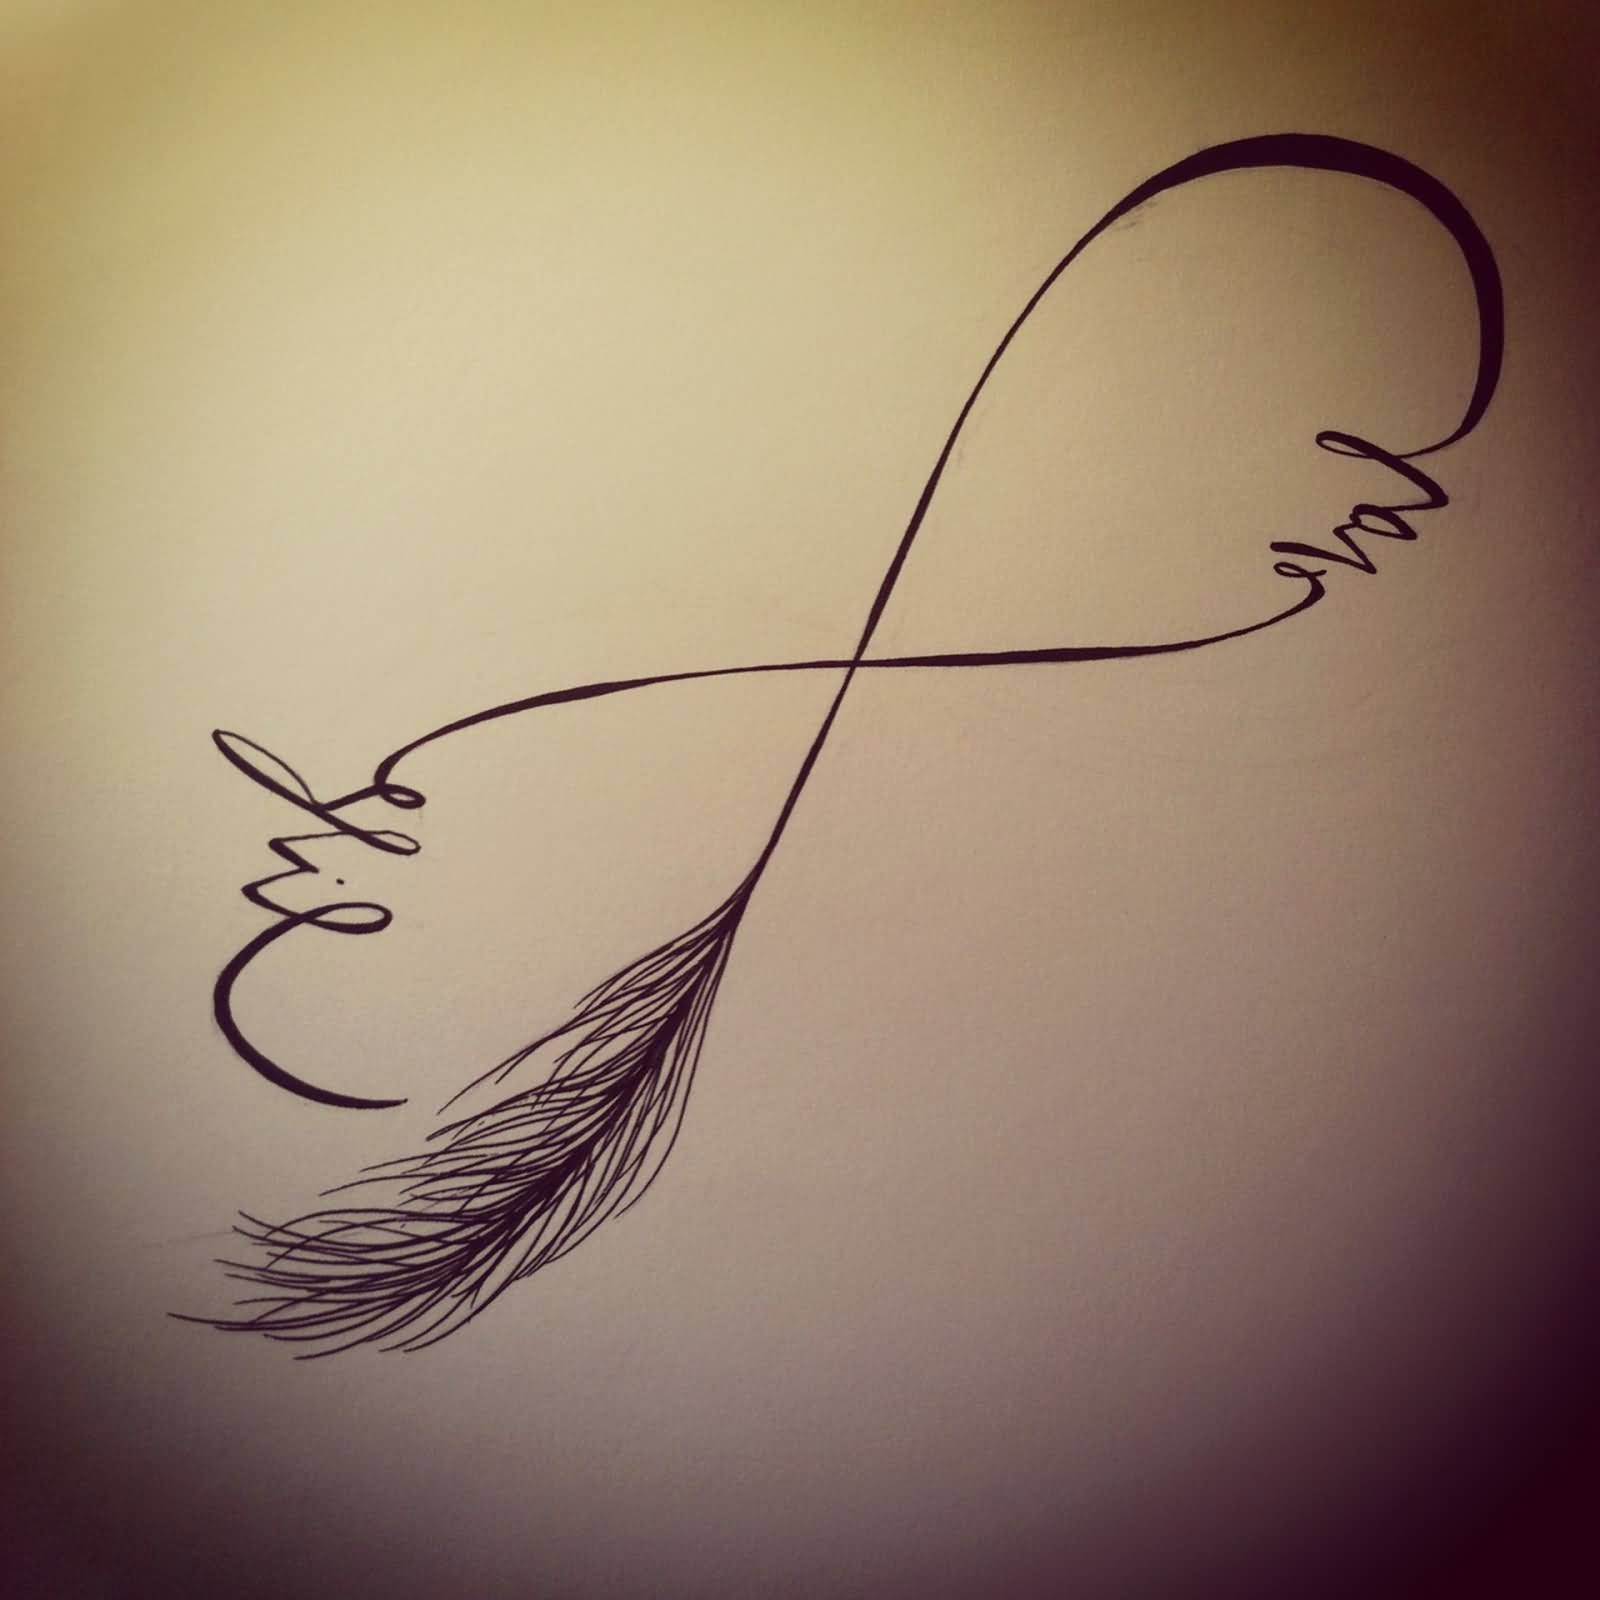 Attractive Infinity Symbol With Feather Tattoo Design